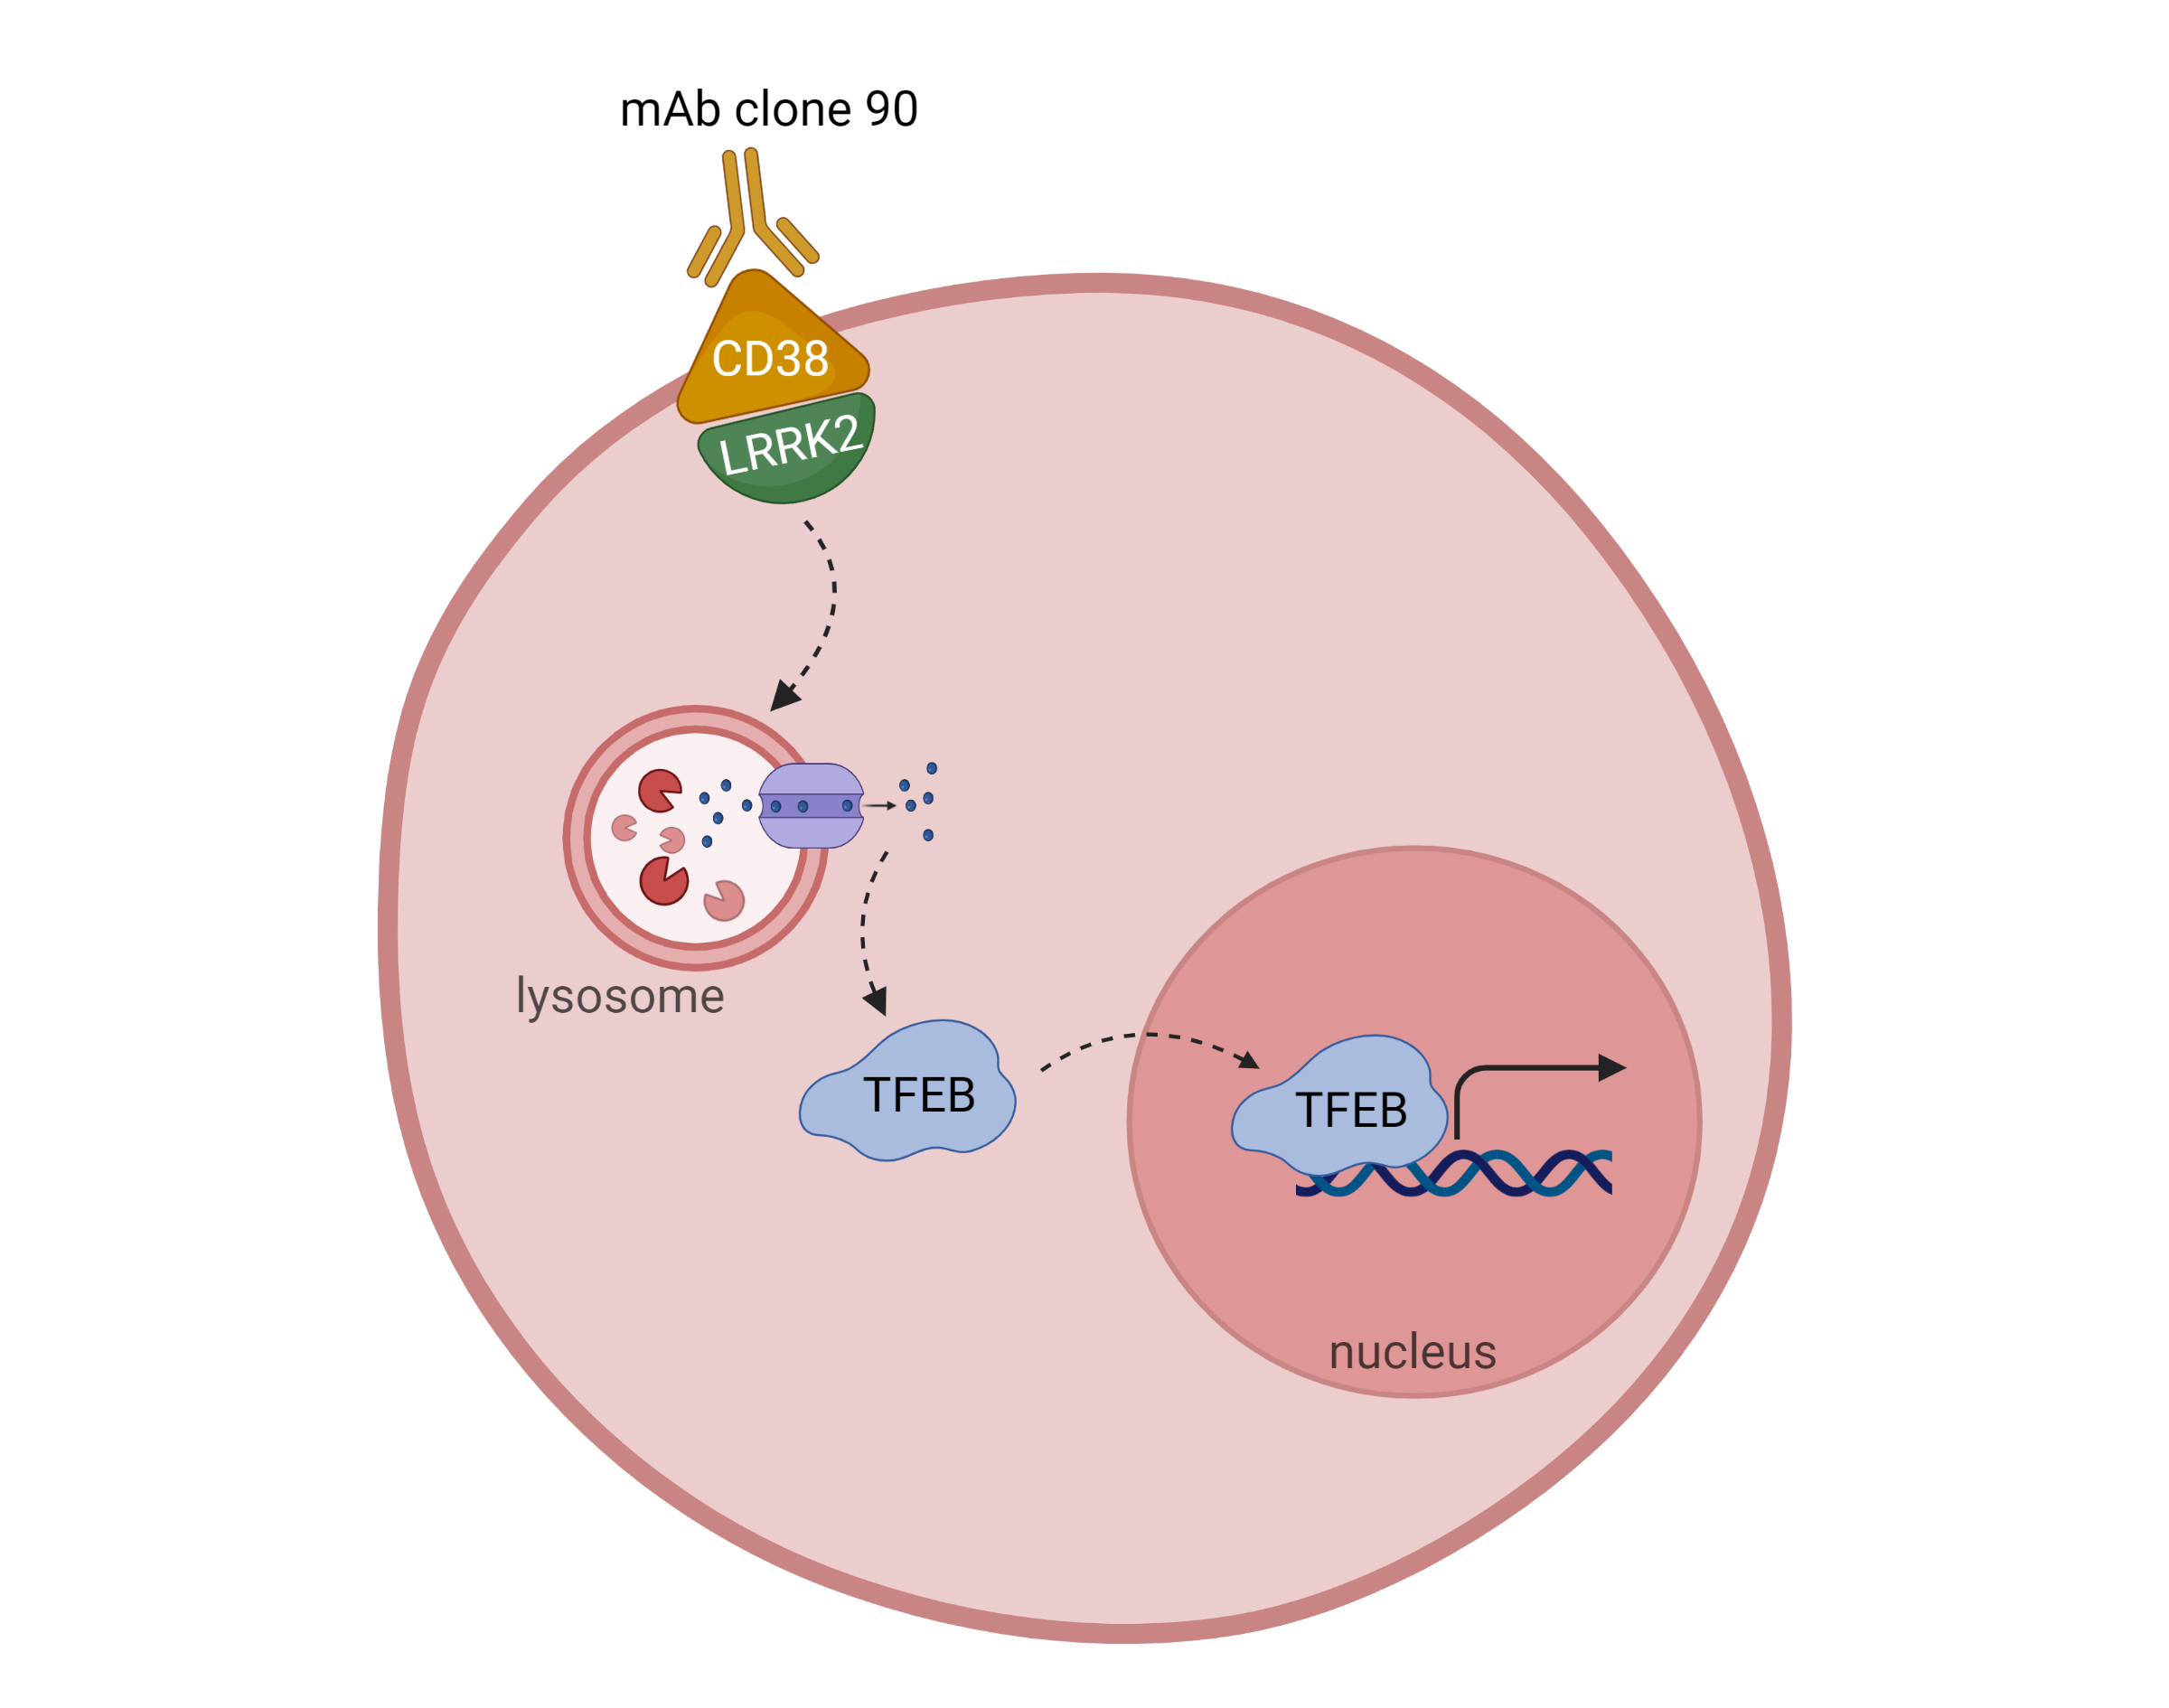 A diagram showing the new signaling molecules in the autophagy pathway. Monoclonal antibody clone 90 ligates CD38 on the cell surface. LRRK2 associates with CD38; then, this complex is internalized and causes TFEB to localize to the nucleus.